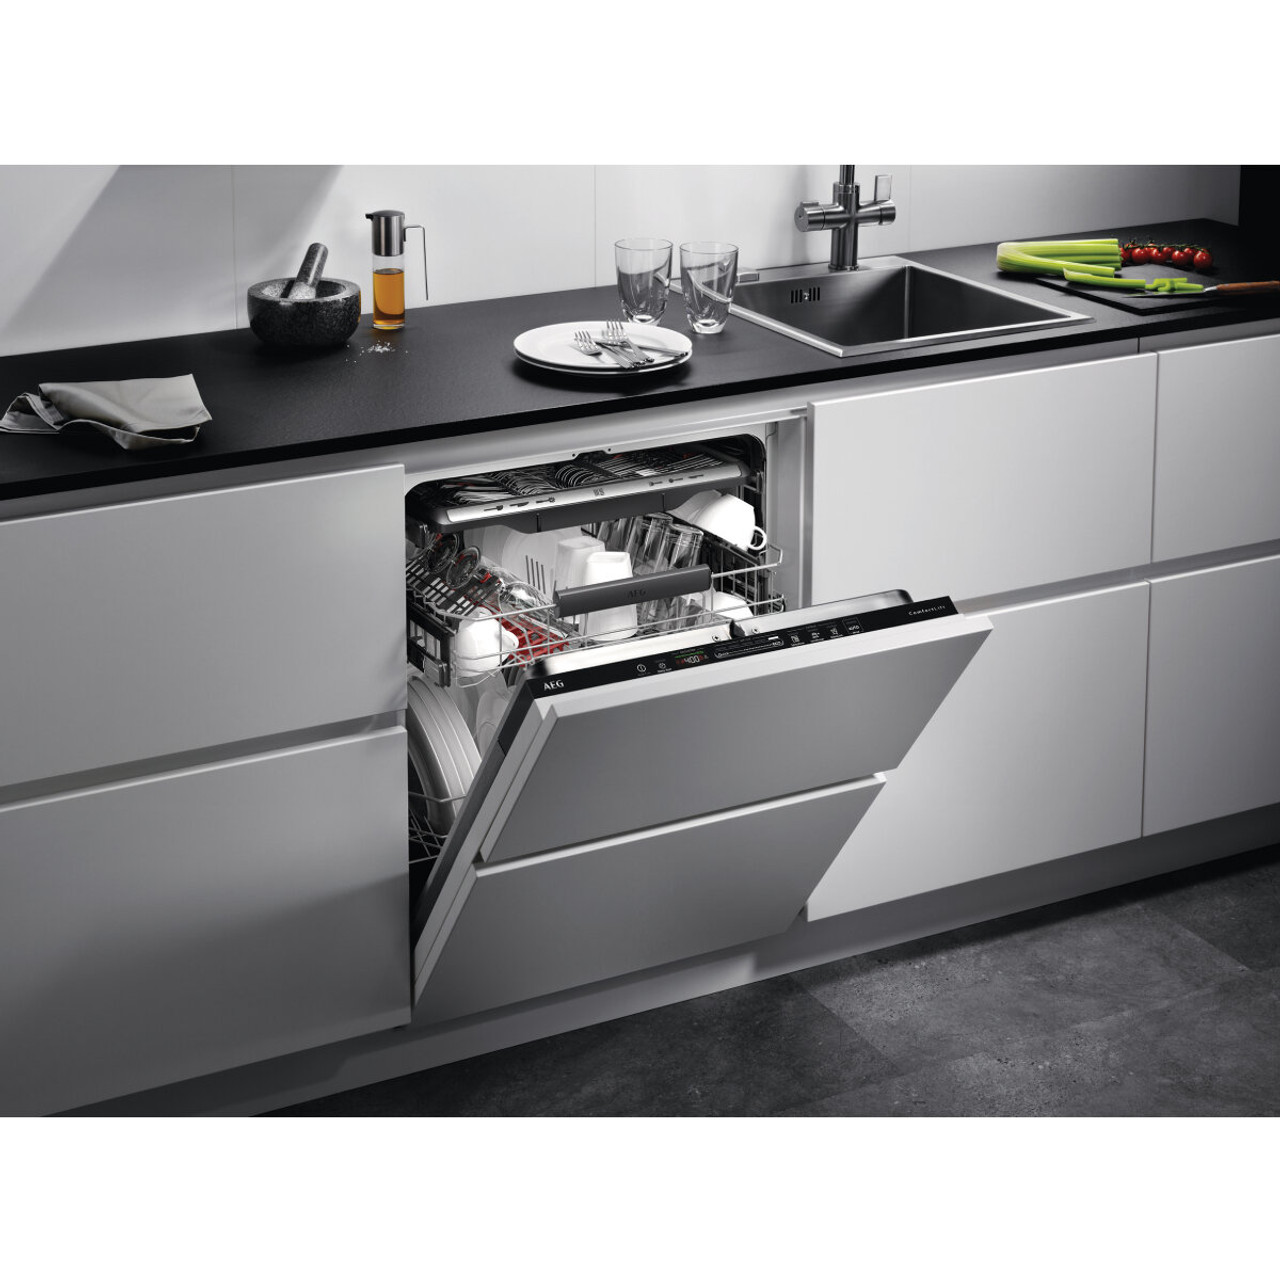 FSE93000RO - 60cm Fully Integrated ProClean Dishwasher